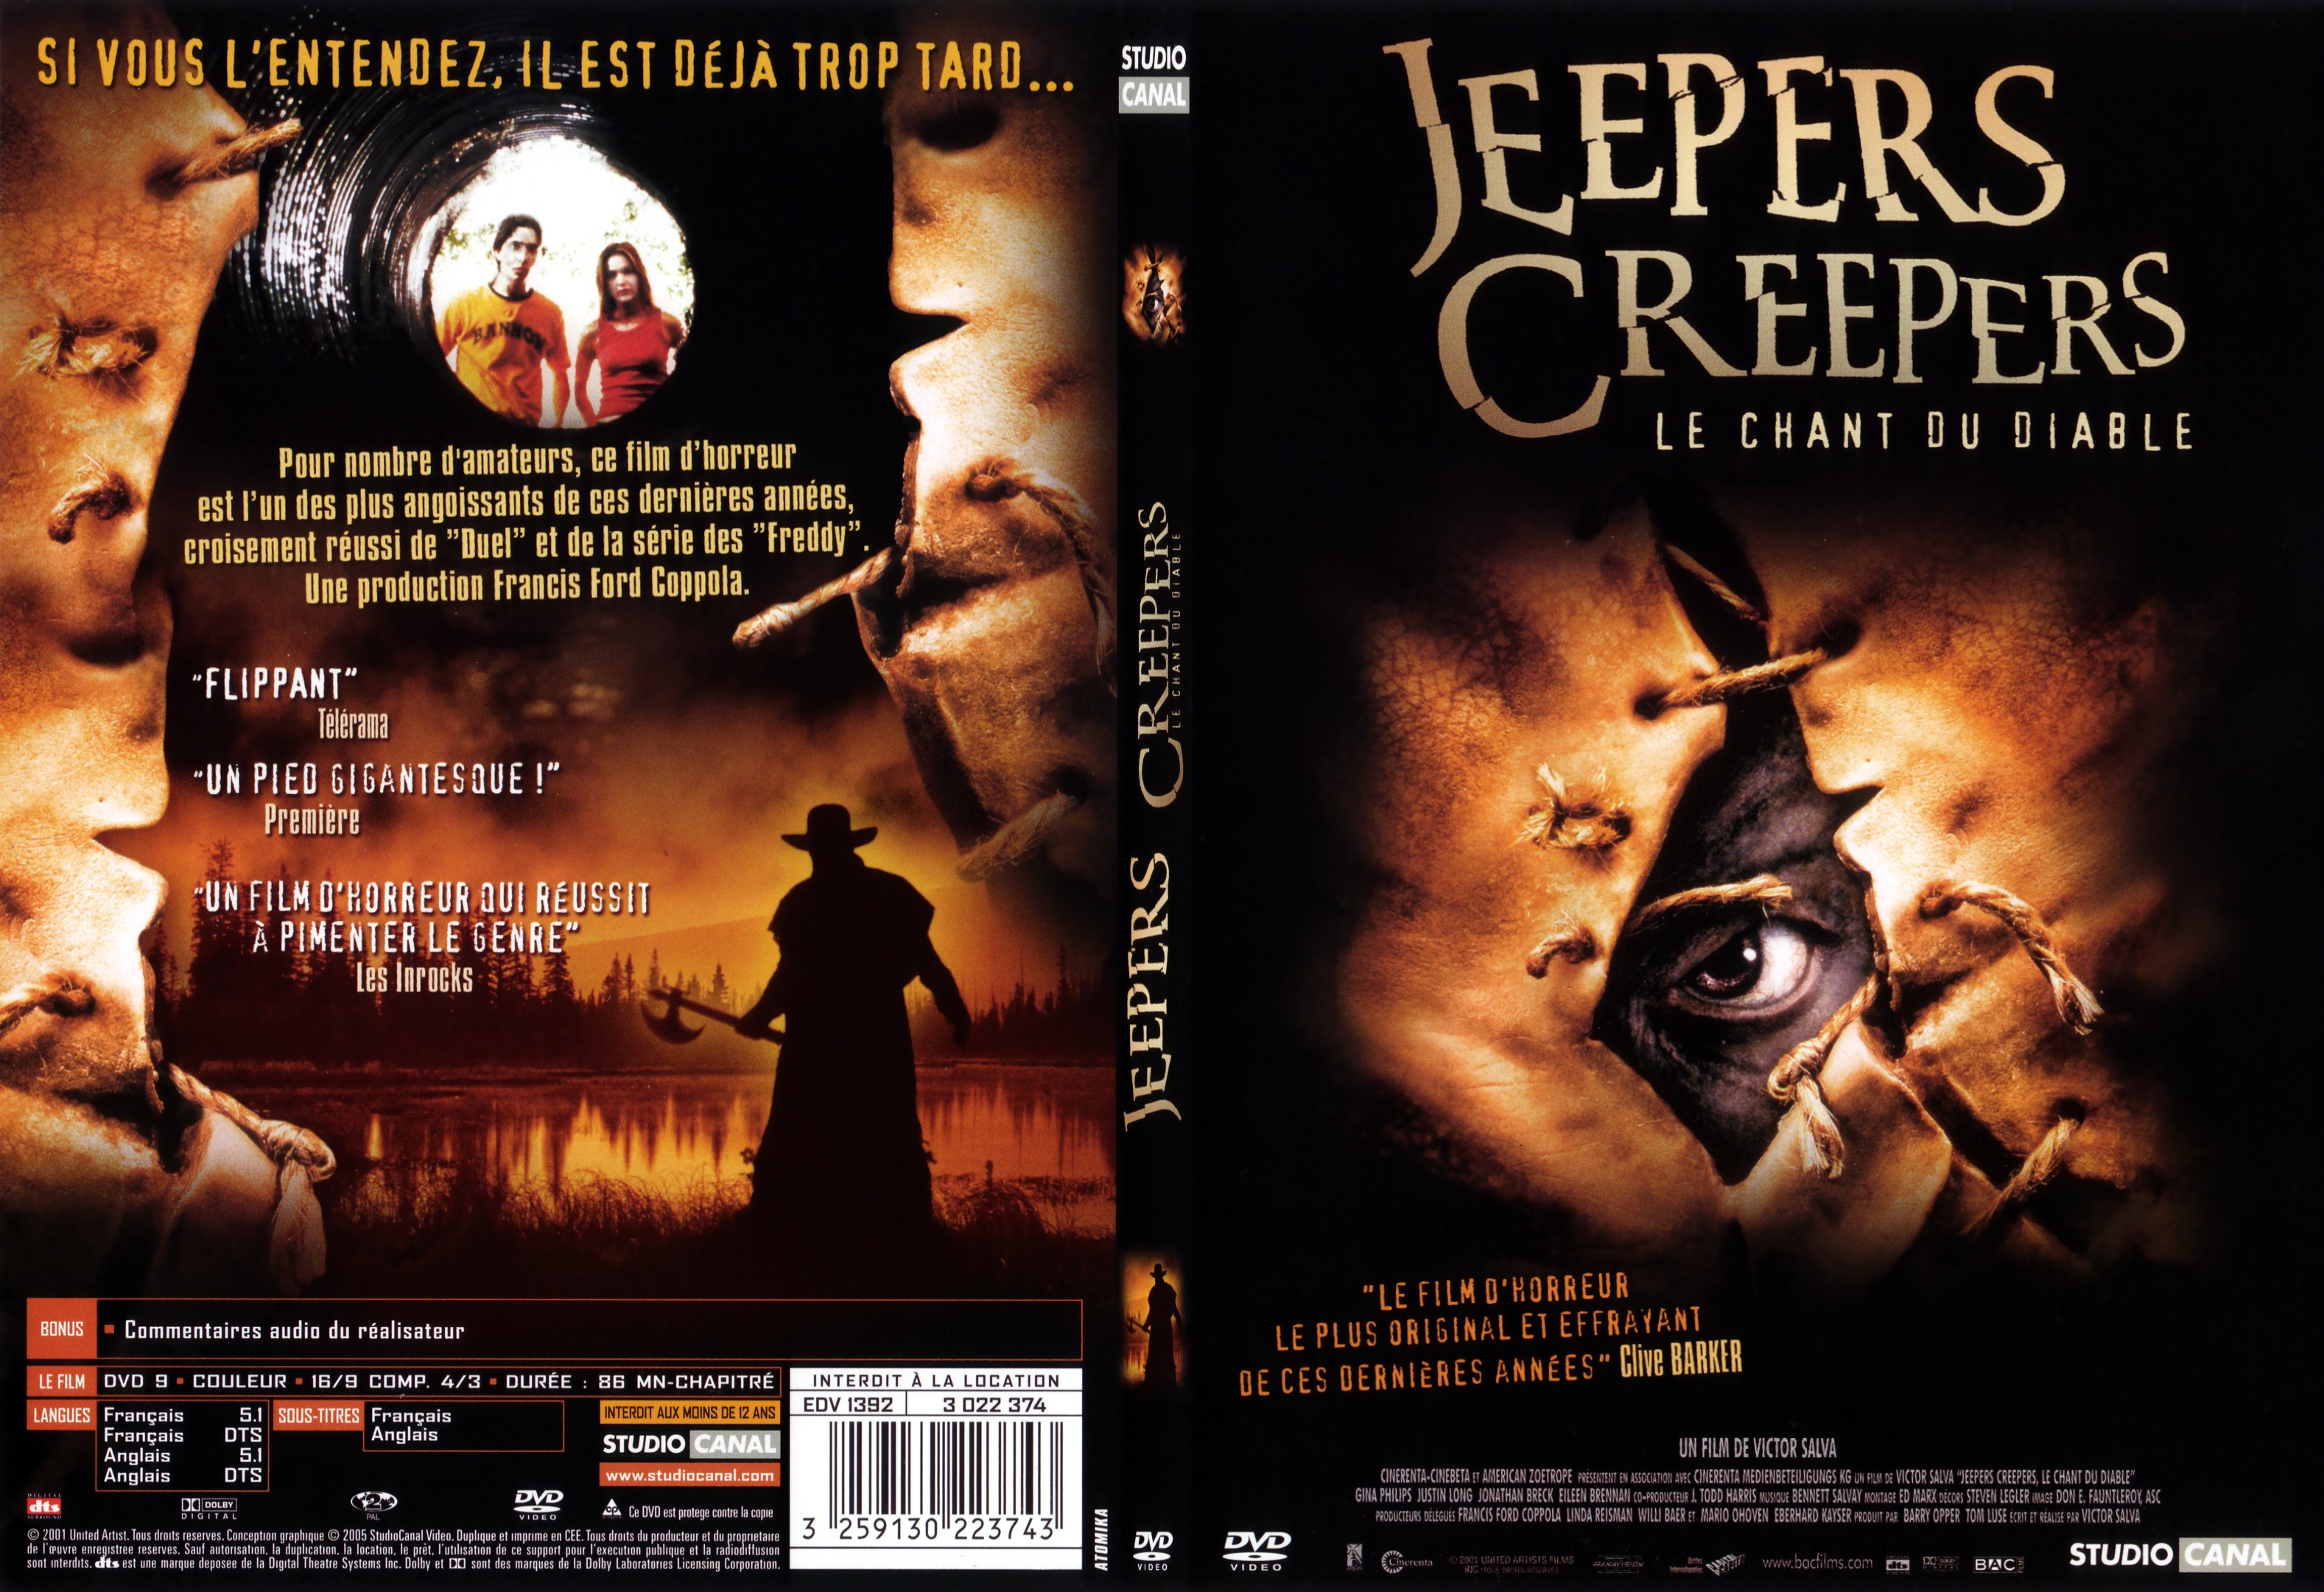 Jaquette DVD Jeepers creepers - SLIM